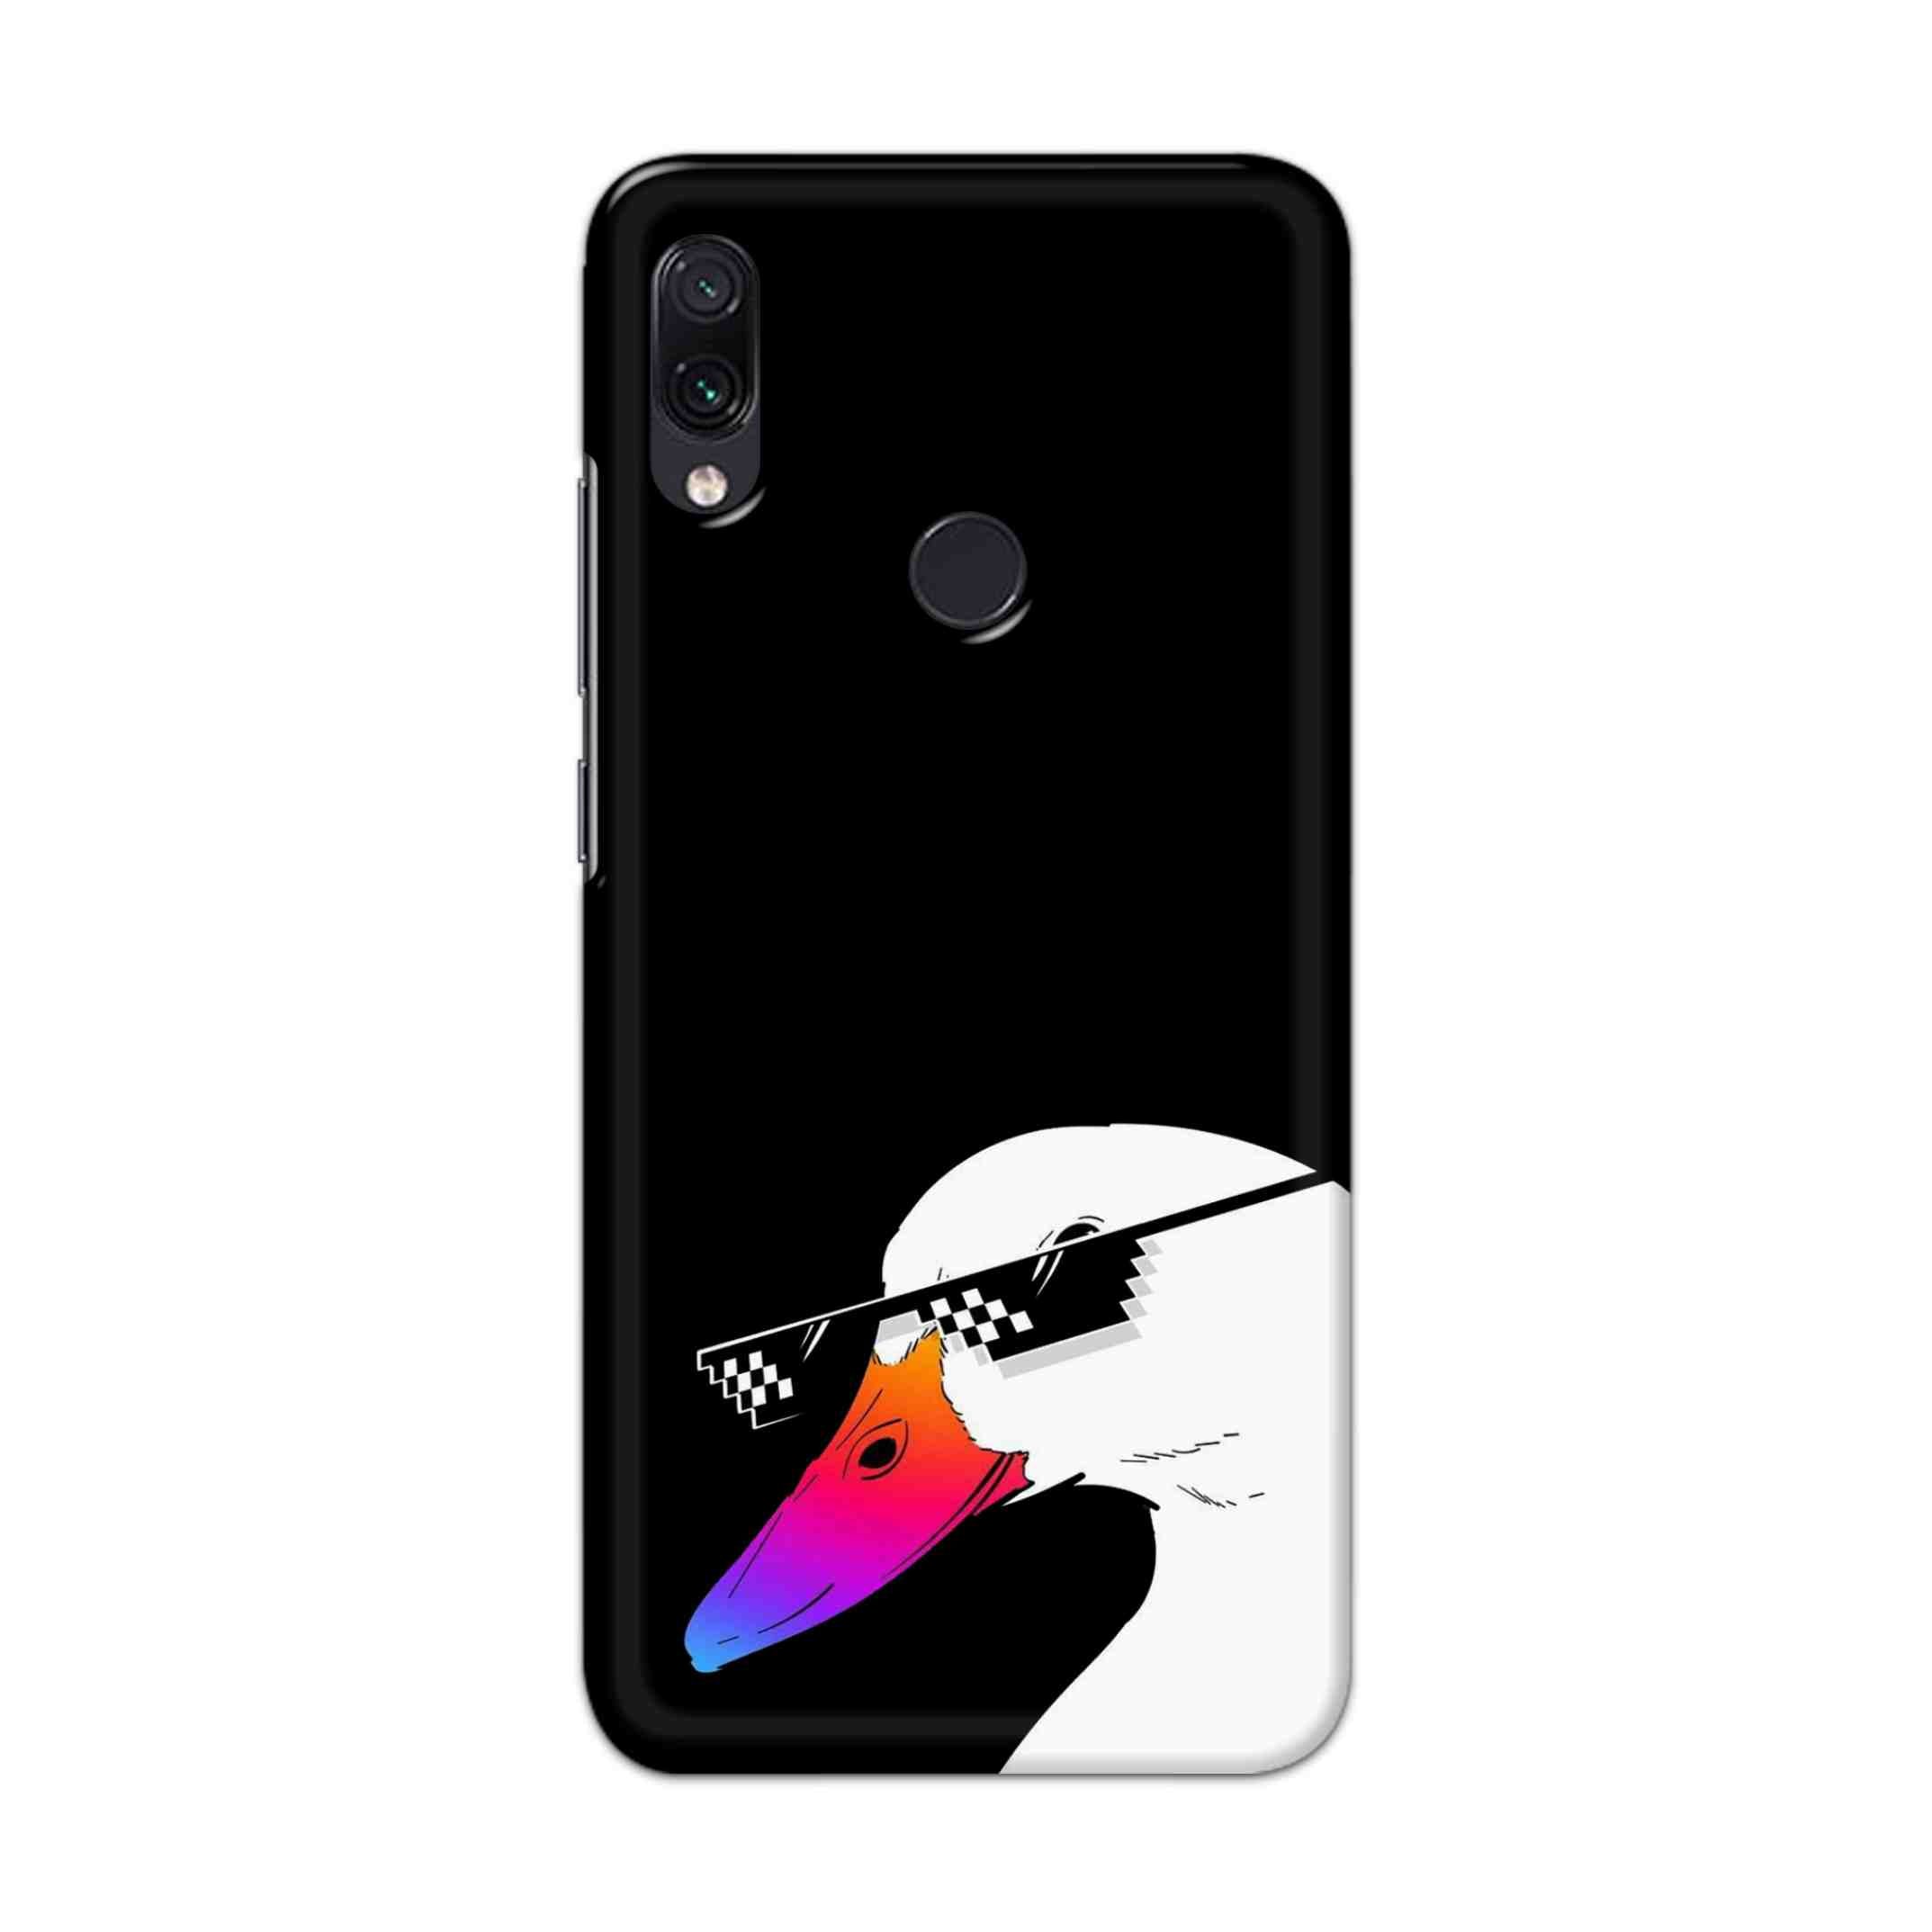 Buy Neon Duck Hard Back Mobile Phone Case Cover For Xiaomi Redmi 7 Online